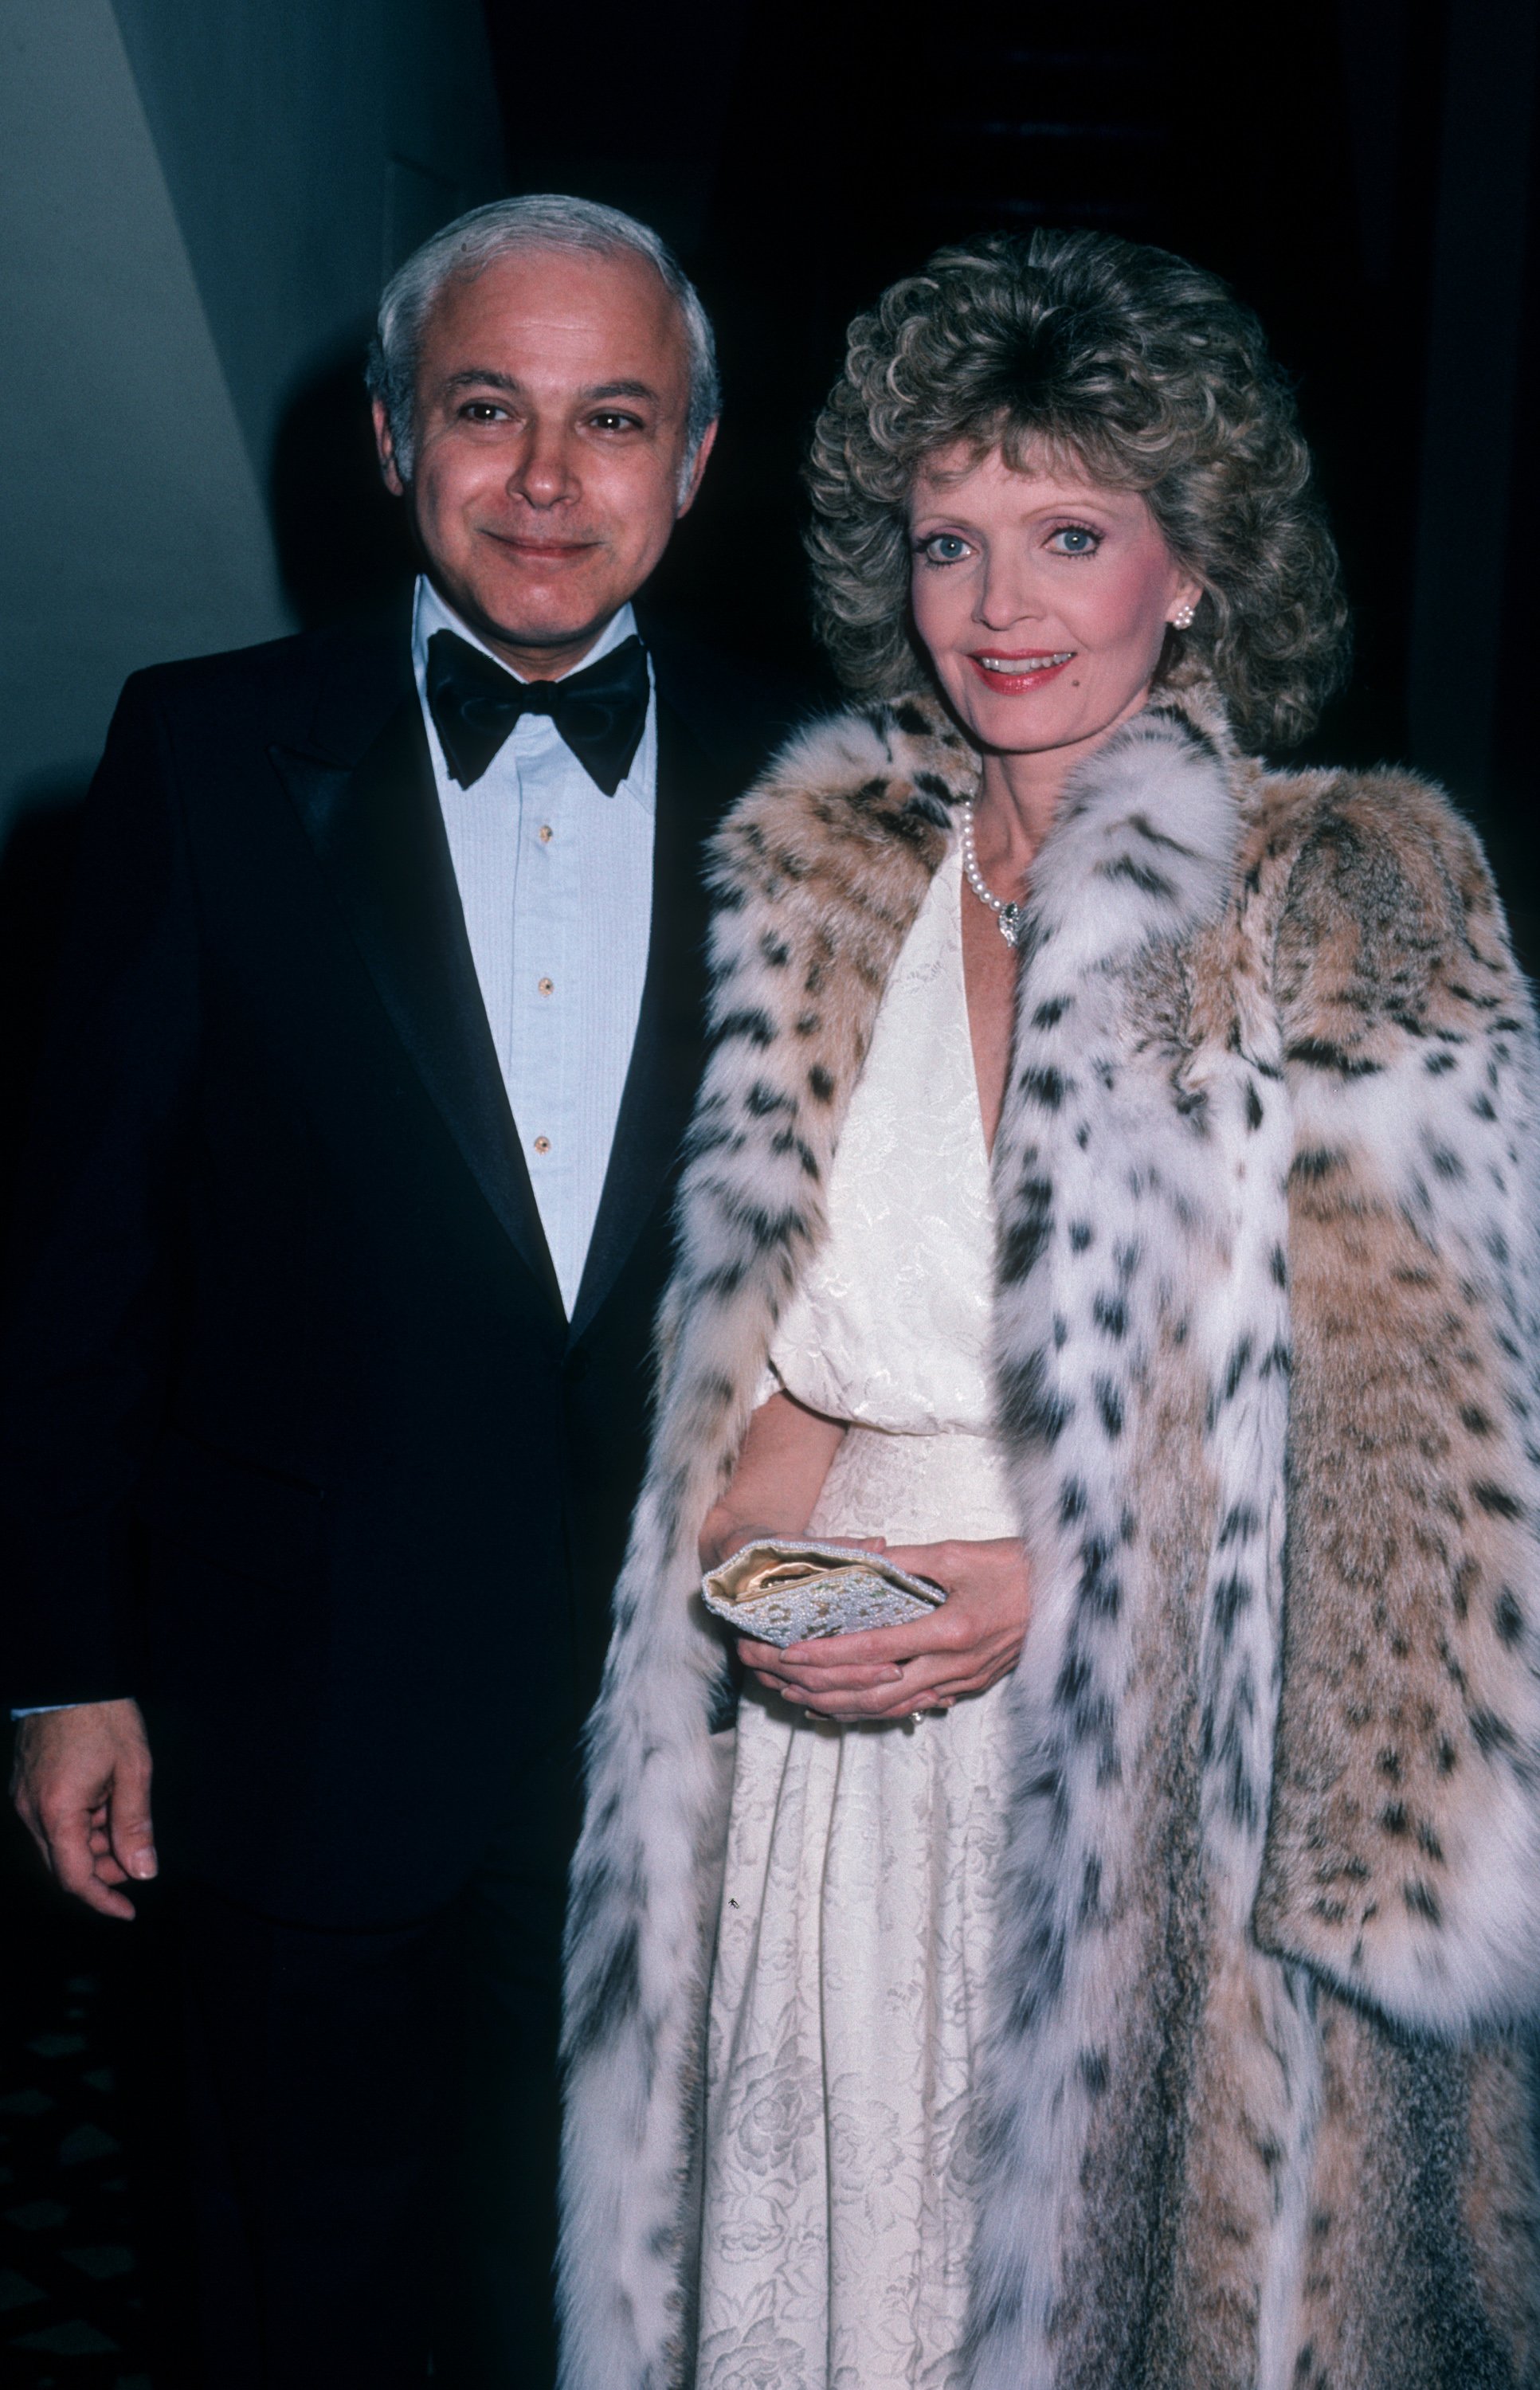 Ira Bernstein and Florence Henderson at the “Scopus Awards” on December 5, 1985, at the Century Plaza Hotel in Century City, California | Photo: Getty Images